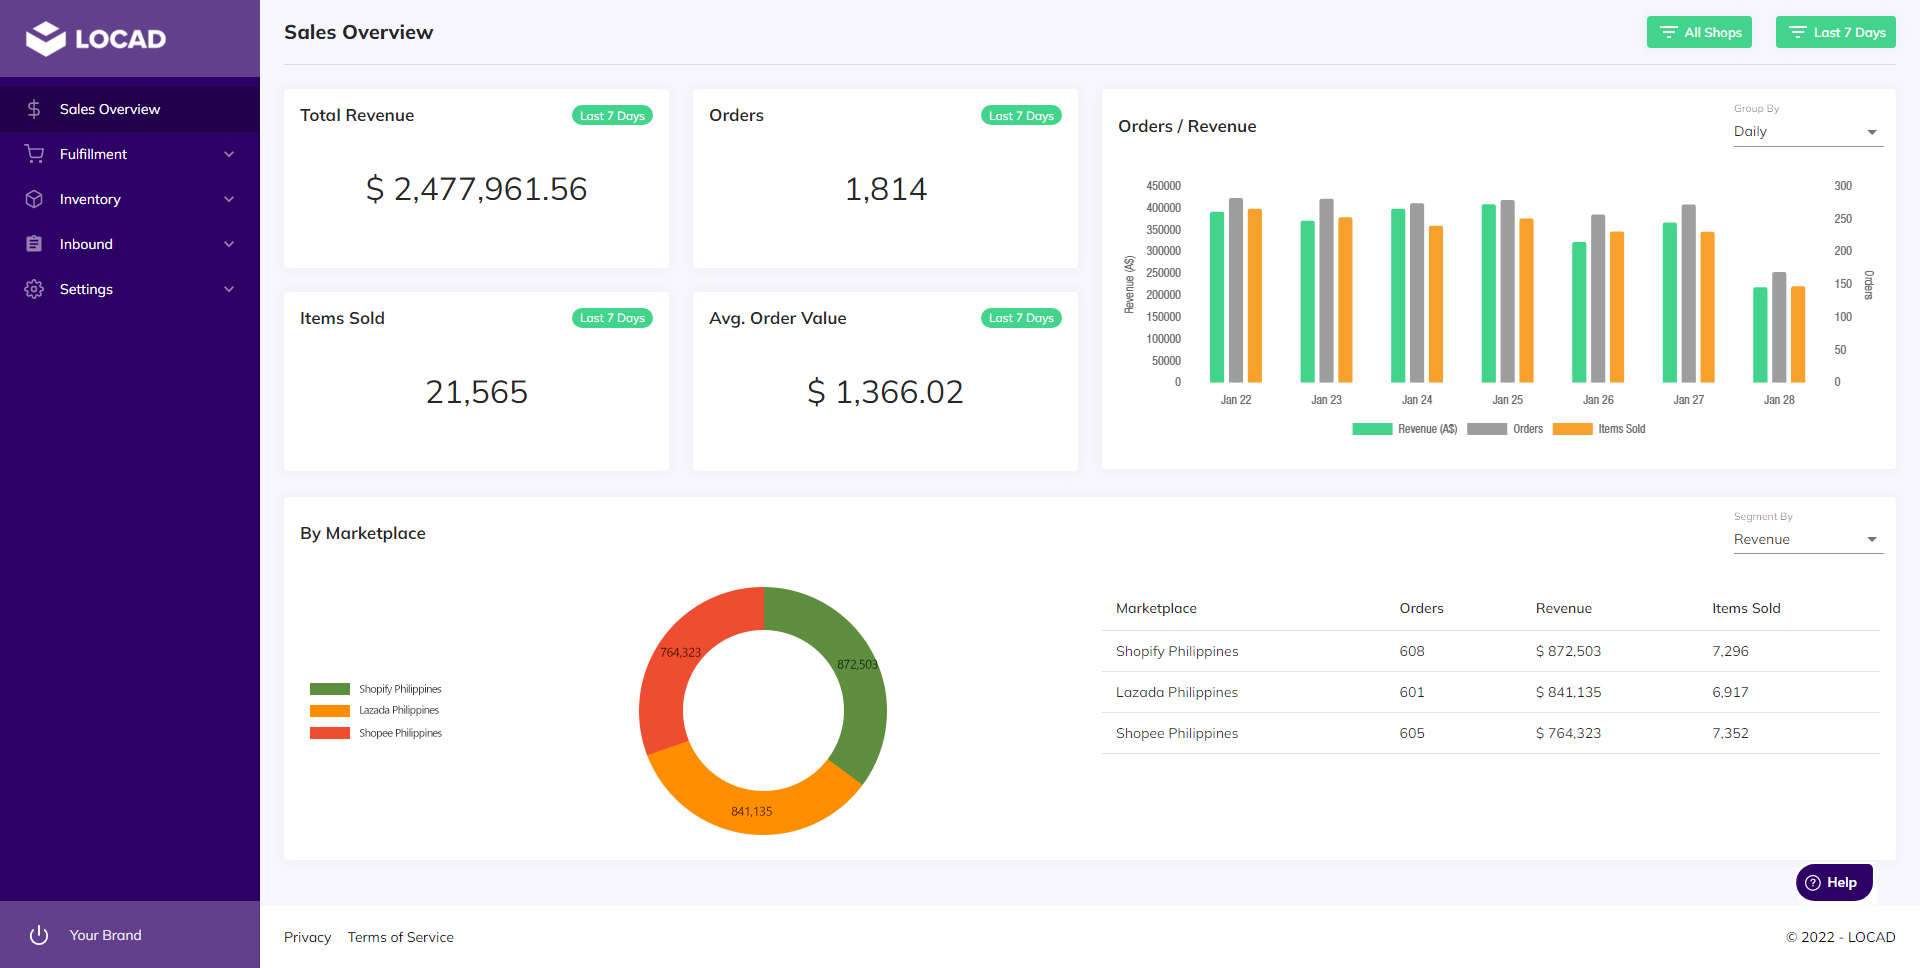 LOCAD Control Tower - Sales Overview: Get a clear view of your revenue across multiple integrated sales channels